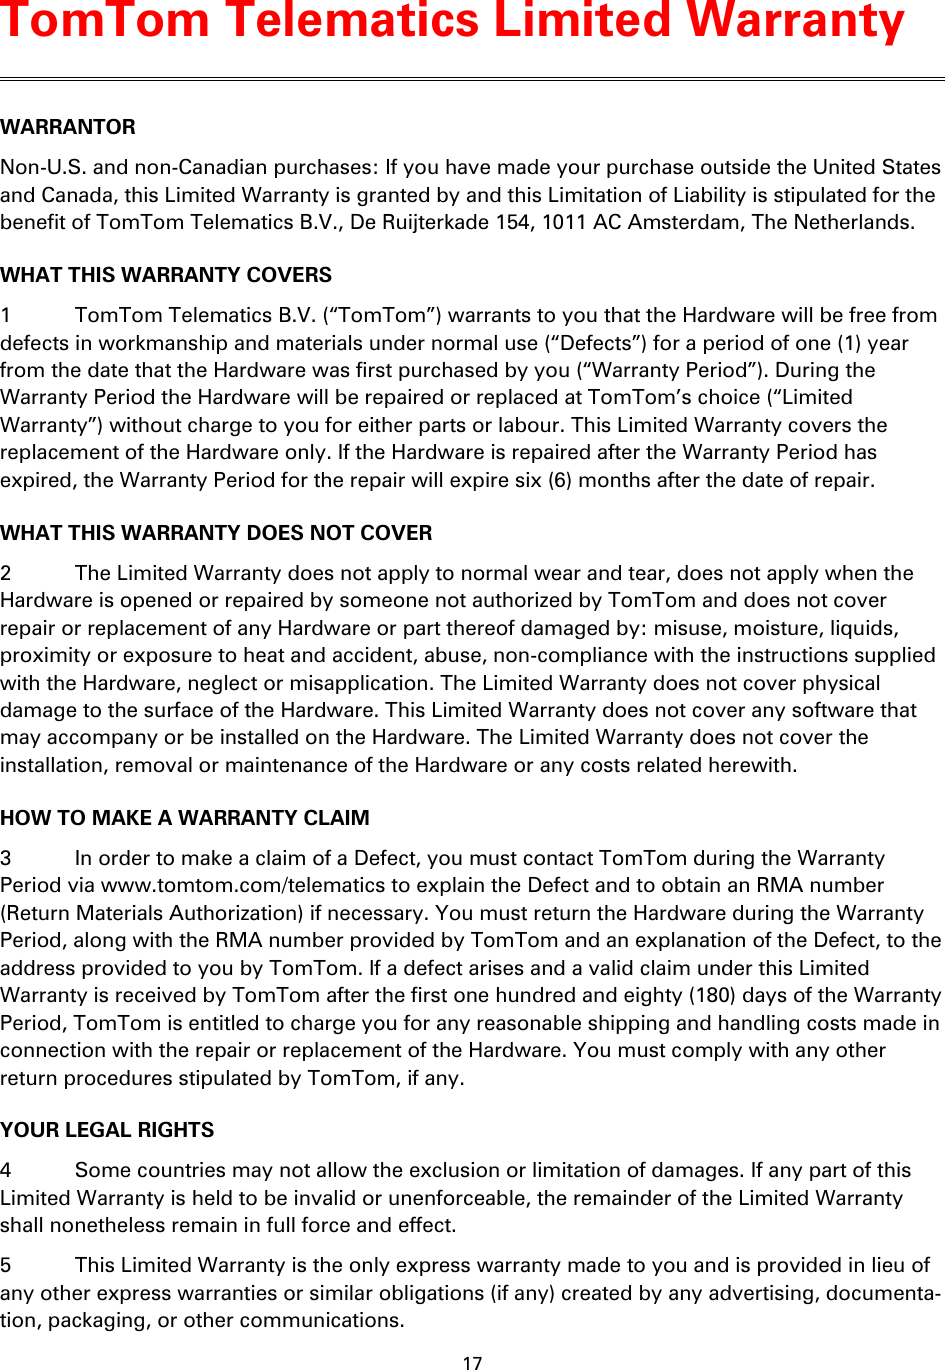 17    WARRANTOR Non-U.S. and non-Canadian purchases: If you have made your purchase outside the United States and Canada, this Limited Warranty is granted by and this Limitation of Liability is stipulated for the benefit of TomTom Telematics B.V., De Ruijterkade 154, 1011 AC Amsterdam, The Netherlands.   WHAT THIS WARRANTY COVERS 1  TomTom Telematics B.V. (“TomTom”) warrants to you that the Hardware will be free from defects in workmanship and materials under normal use (“Defects”) for a period of one (1) year from the date that the Hardware was first purchased by you (“Warranty Period”). During the Warranty Period the Hardware will be repaired or replaced at TomTom’s choice (“Limited Warranty”) without charge to you for either parts or labour. This Limited Warranty covers the replacement of the Hardware only. If the Hardware is repaired after the Warranty Period has expired, the Warranty Period for the repair will expire six (6) months after the date of repair. WHAT THIS WARRANTY DOES NOT COVER 2  The Limited Warranty does not apply to normal wear and tear, does not apply when the Hardware is opened or repaired by someone not authorized by TomTom and does not cover repair or replacement of any Hardware or part thereof damaged by: misuse, moisture, liquids, proximity or exposure to heat and accident, abuse, non-compliance with the instructions supplied with the Hardware, neglect or misapplication. The Limited Warranty does not cover physical damage to the surface of the Hardware. This Limited Warranty does not cover any software that may accompany or be installed on the Hardware. The Limited Warranty does not cover the installation, removal or maintenance of the Hardware or any costs related herewith. HOW TO MAKE A WARRANTY CLAIM 3  In order to make a claim of a Defect, you must contact TomTom during the Warranty Period via www.tomtom.com/telematics to explain the Defect and to obtain an RMA number (Return Materials Authorization) if necessary. You must return the Hardware during the Warranty Period, along with the RMA number provided by TomTom and an explanation of the Defect, to the address provided to you by TomTom. If a defect arises and a valid claim under this Limited Warranty is received by TomTom after the first one hundred and eighty (180) days of the Warranty Period, TomTom is entitled to charge you for any reasonable shipping and handling costs made in connection with the repair or replacement of the Hardware. You must comply with any other return procedures stipulated by TomTom, if any. YOUR LEGAL RIGHTS 4  Some countries may not allow the exclusion or limitation of damages. If any part of this Limited Warranty is held to be invalid or unenforceable, the remainder of the Limited Warranty shall nonetheless remain in full force and effect. 5  This Limited Warranty is the only express warranty made to you and is provided in lieu of any other express warranties or similar obligations (if any) created by any advertising, documenta-tion, packaging, or other communications. TomTom Telematics Limited Warranty 